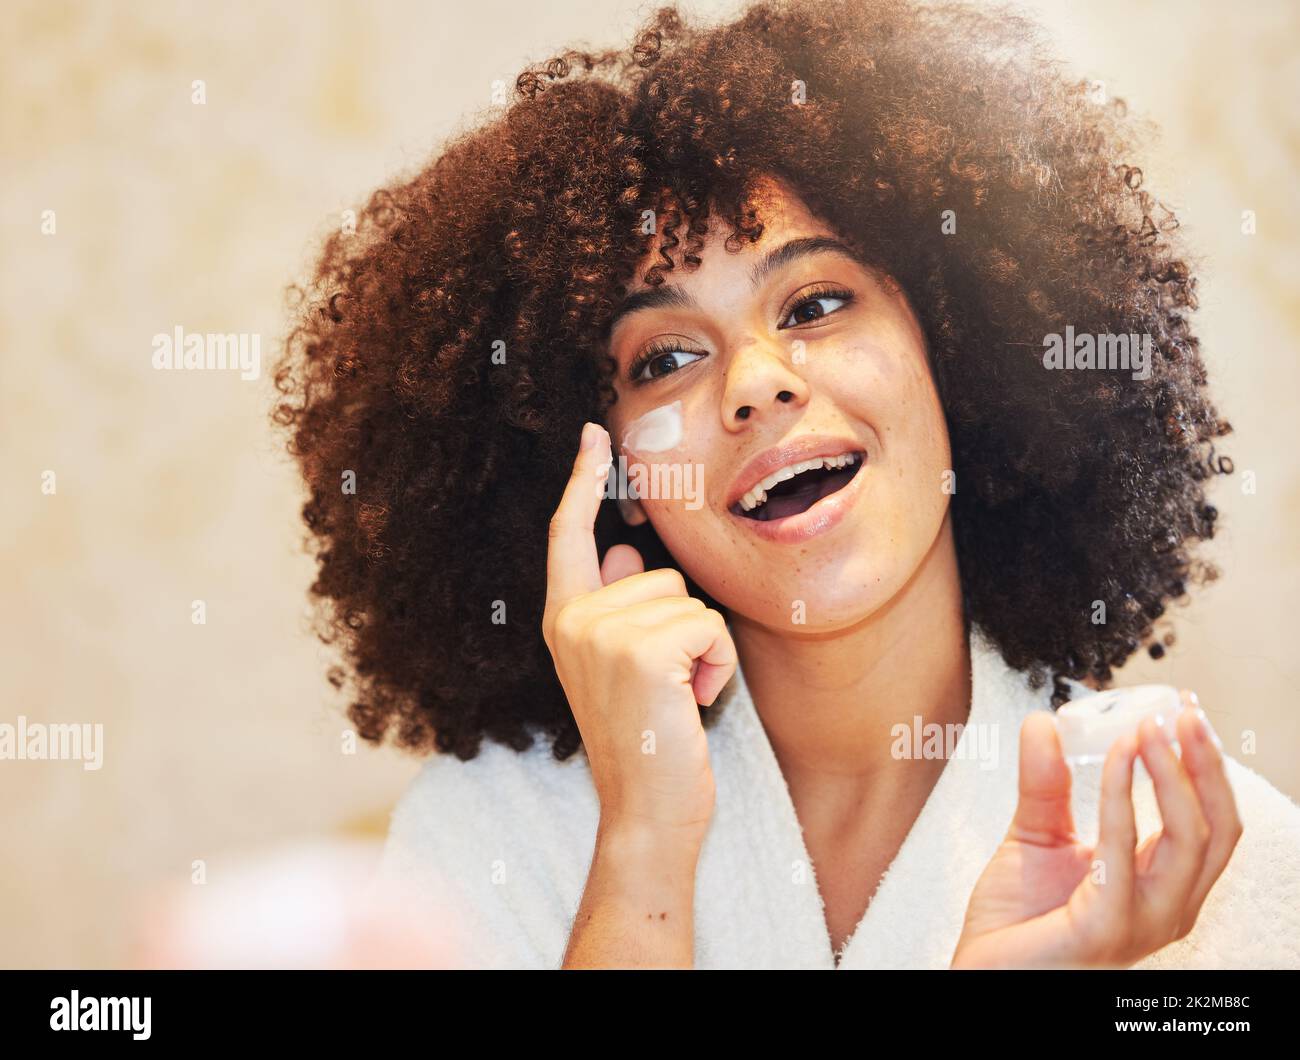 Keep your skin moisturised for the best results. Shot of a beautiful young woman applying moisturiser to her face. Stock Photo